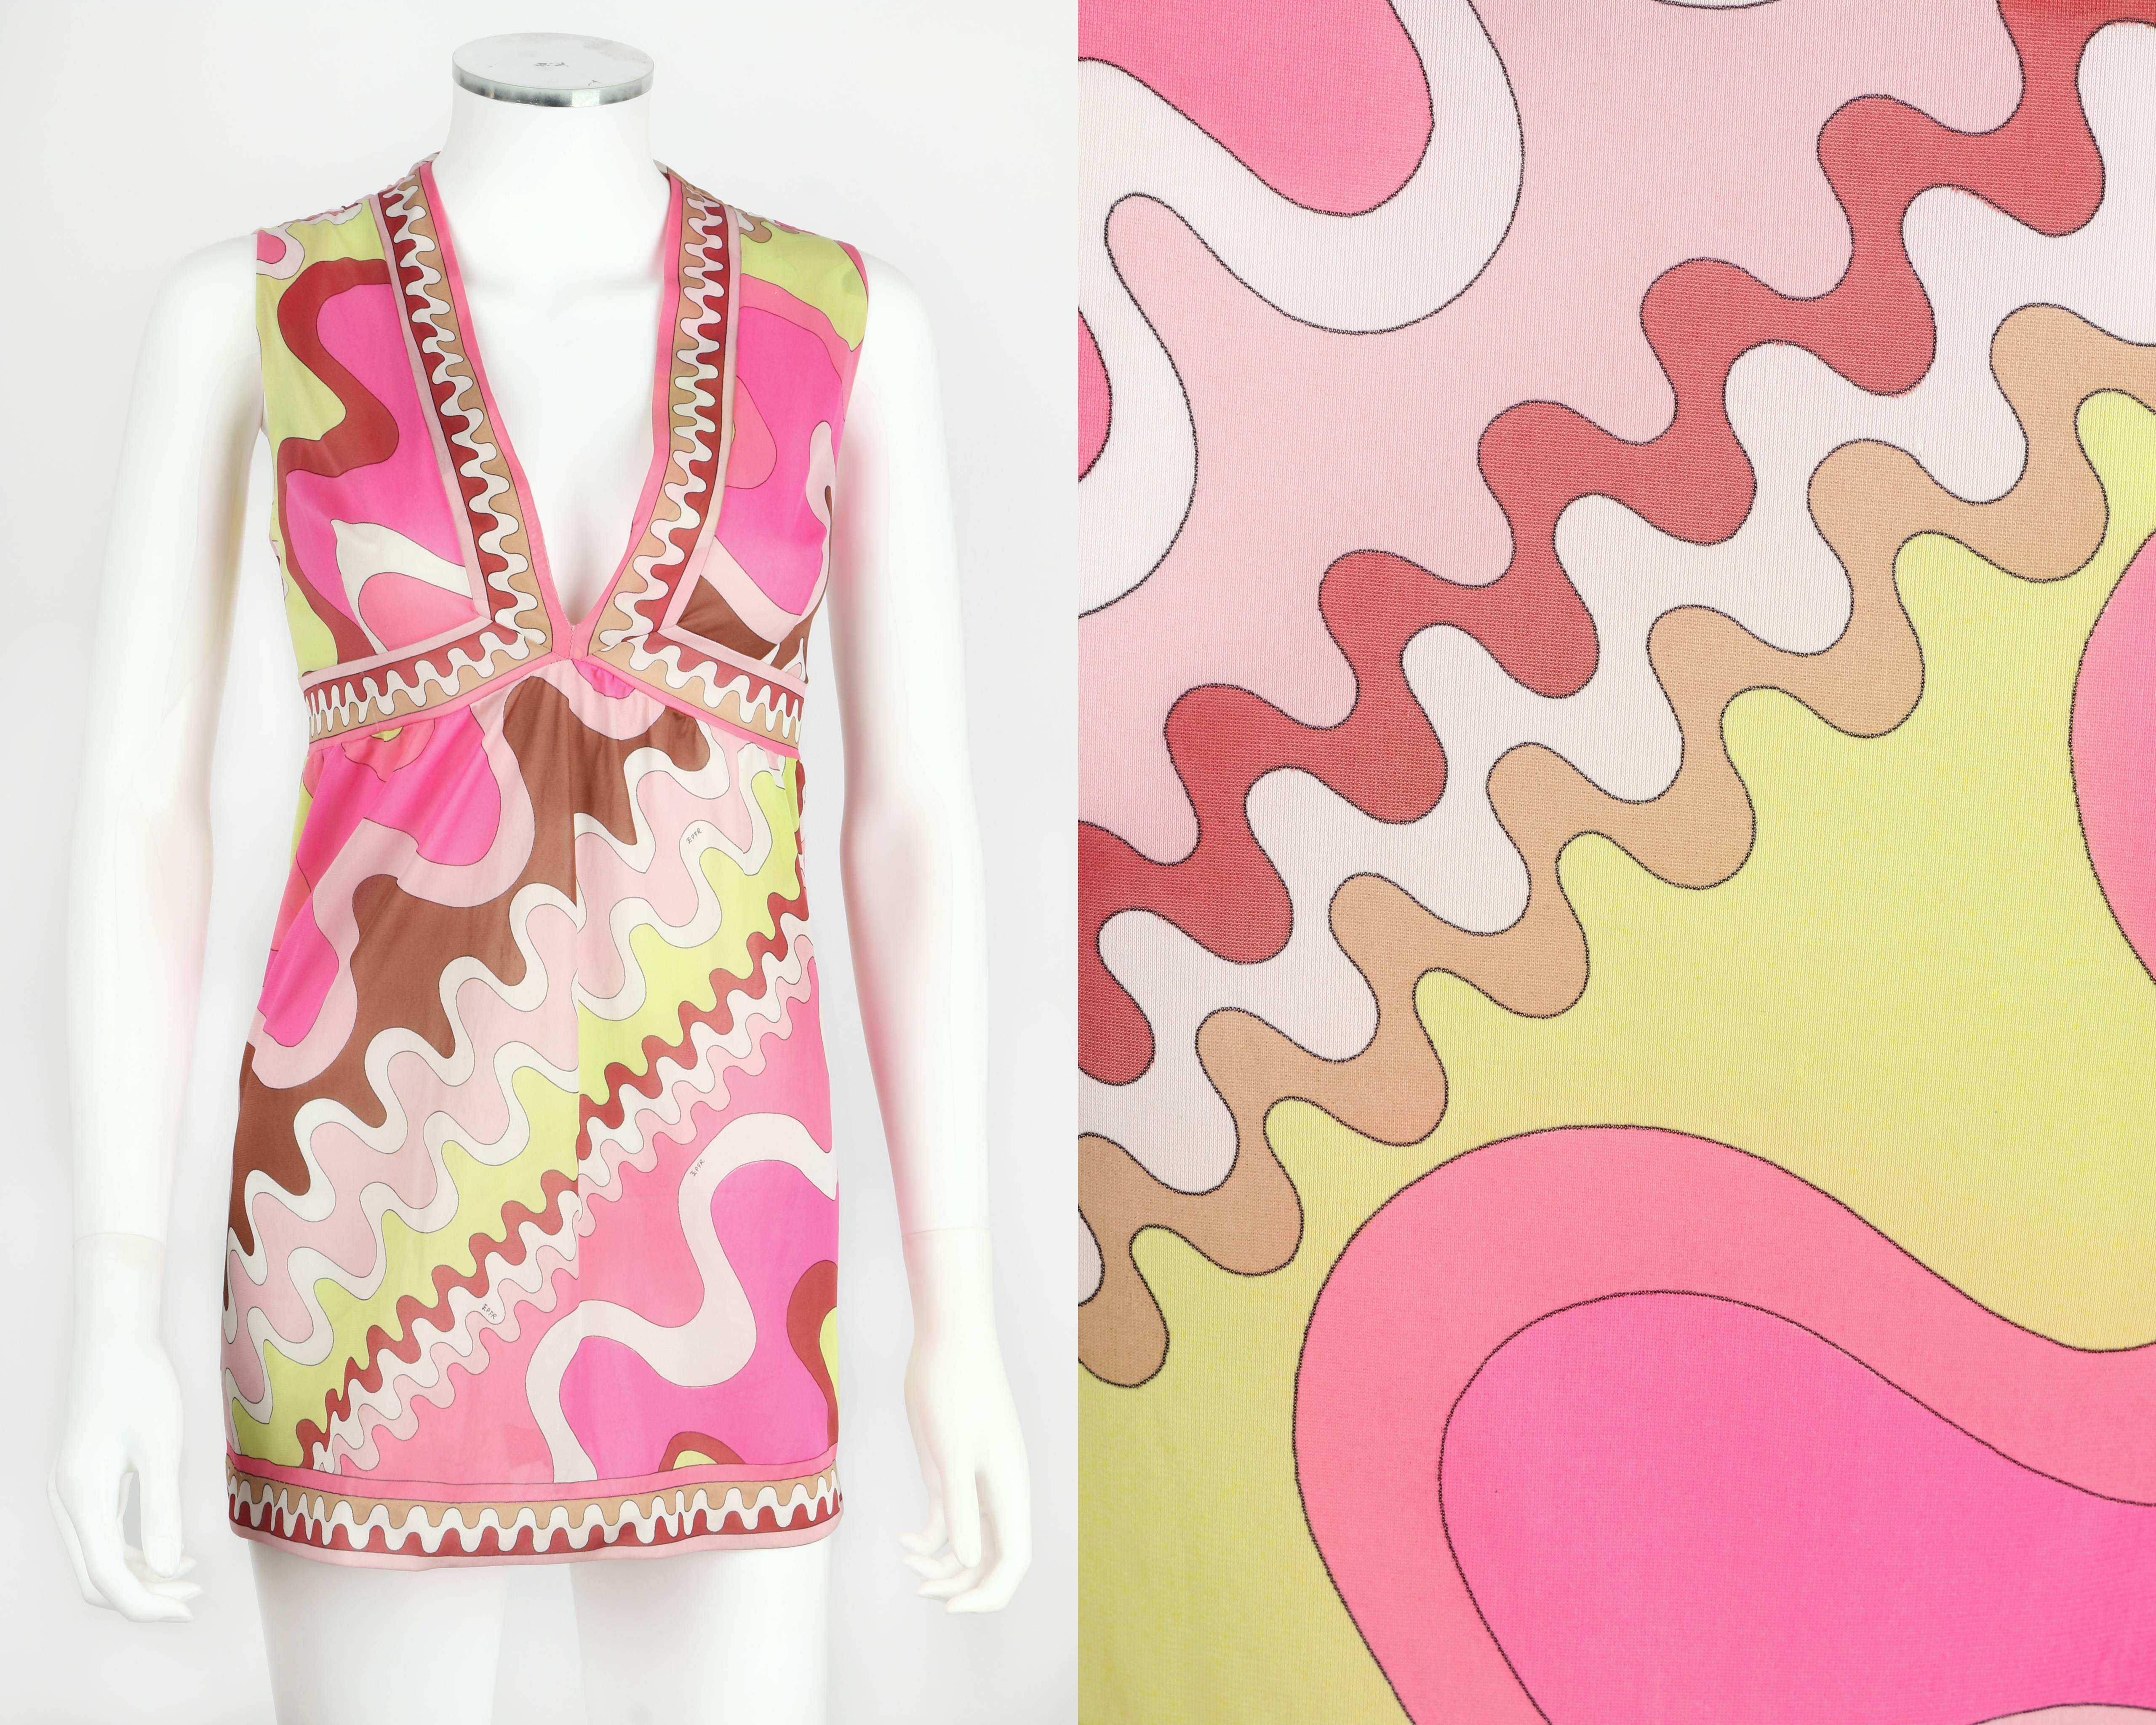 Vintage c.1960's Emilio Pucci for Formfit Rogers multicolor wave print sleeveless top. Low cut v-neckline. Empire waistline. Decorative border detail on neckline, waist, and hem. Slip on style. Has been re-hemmed. Please note that this item was